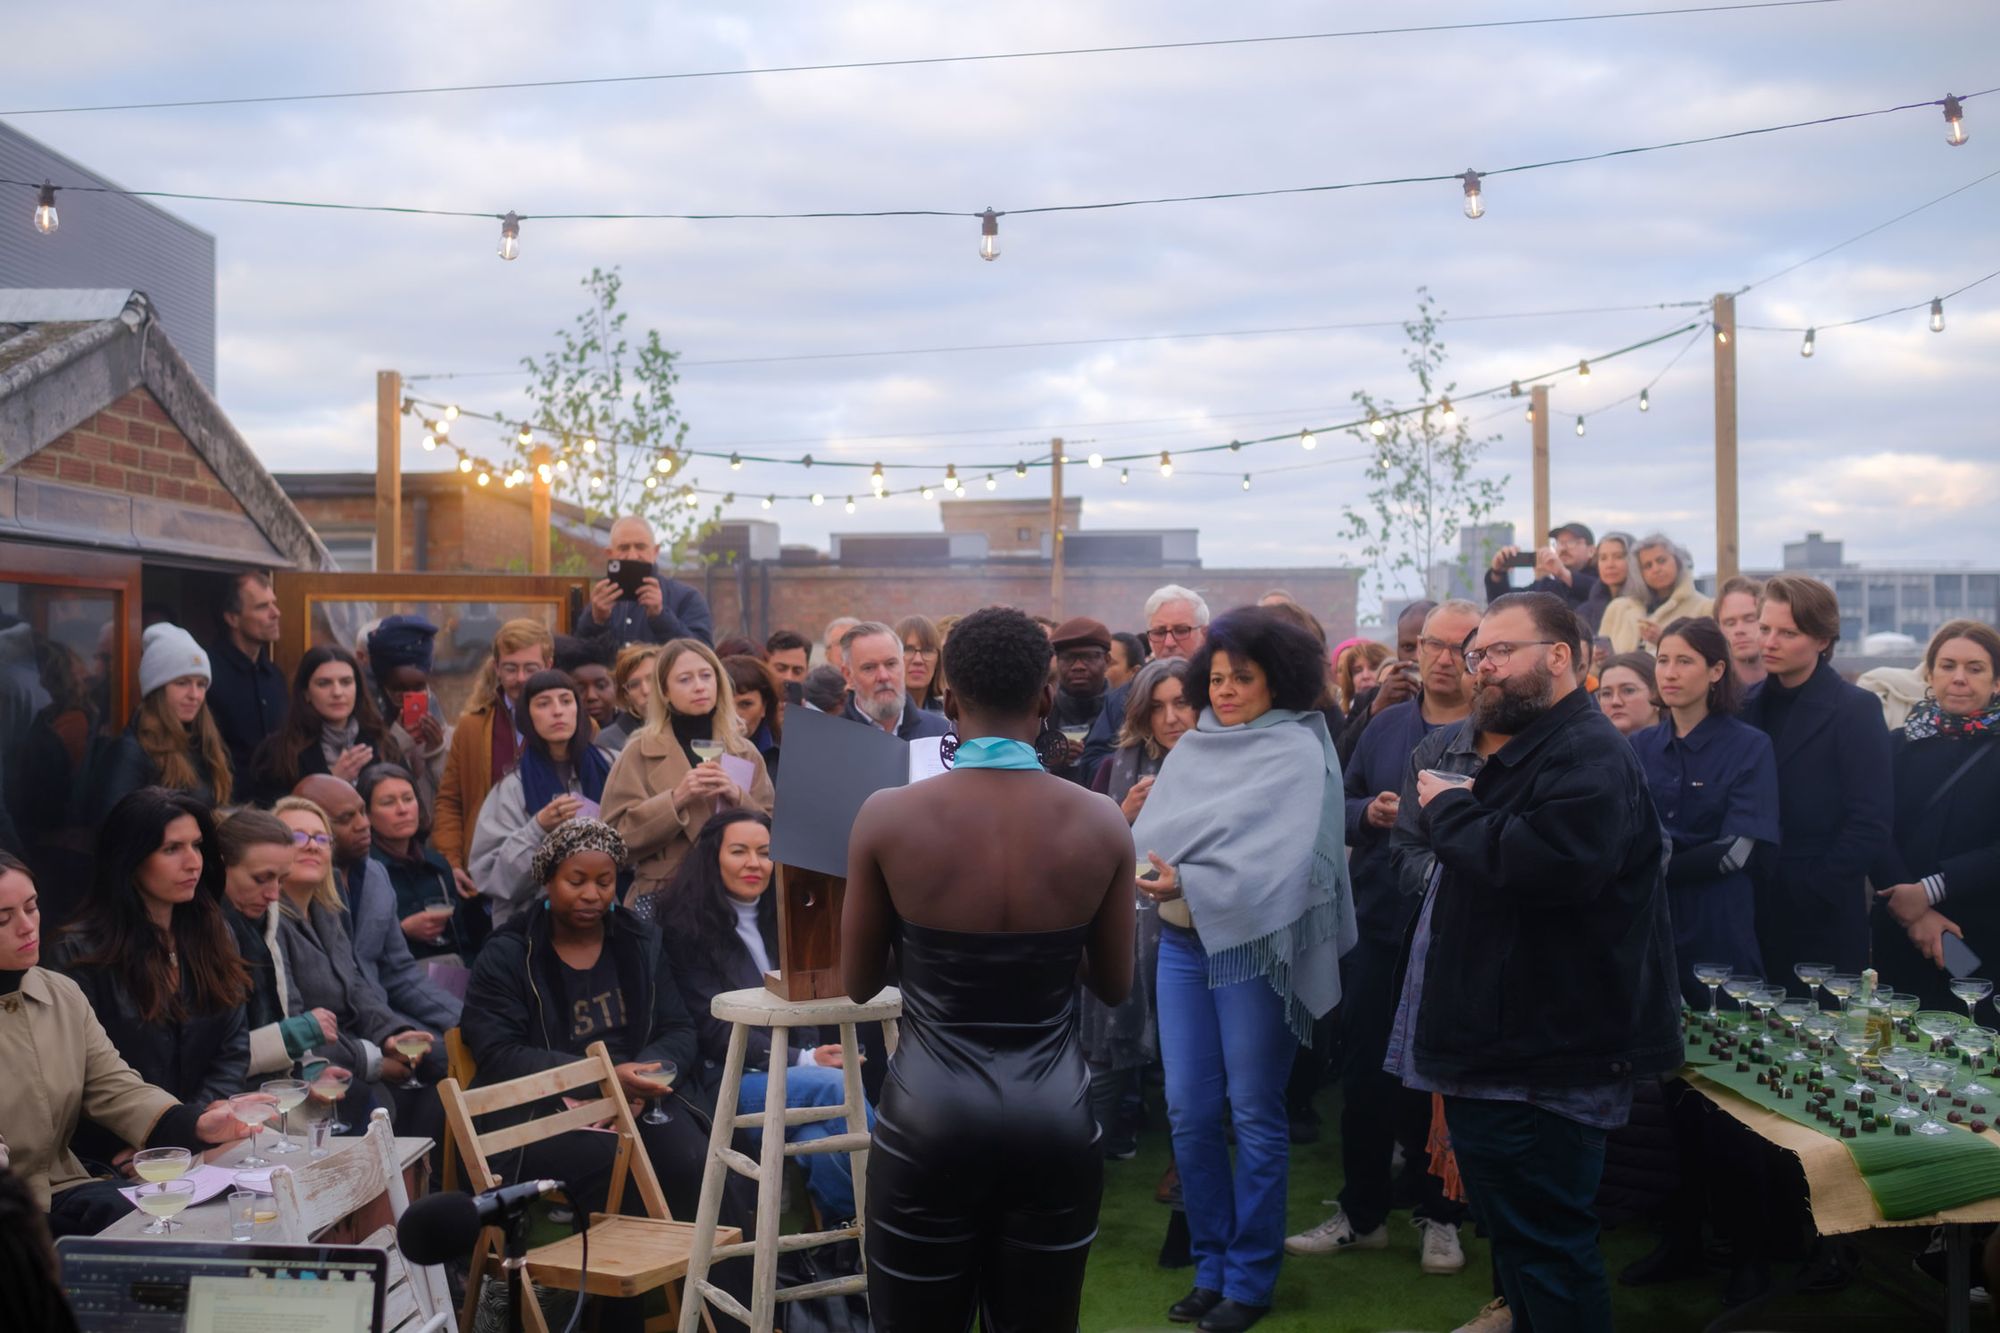 Image of the roofterrace with audience gathered around performer during Zina Saro Wiwa's Illicit Gin Assembly #4